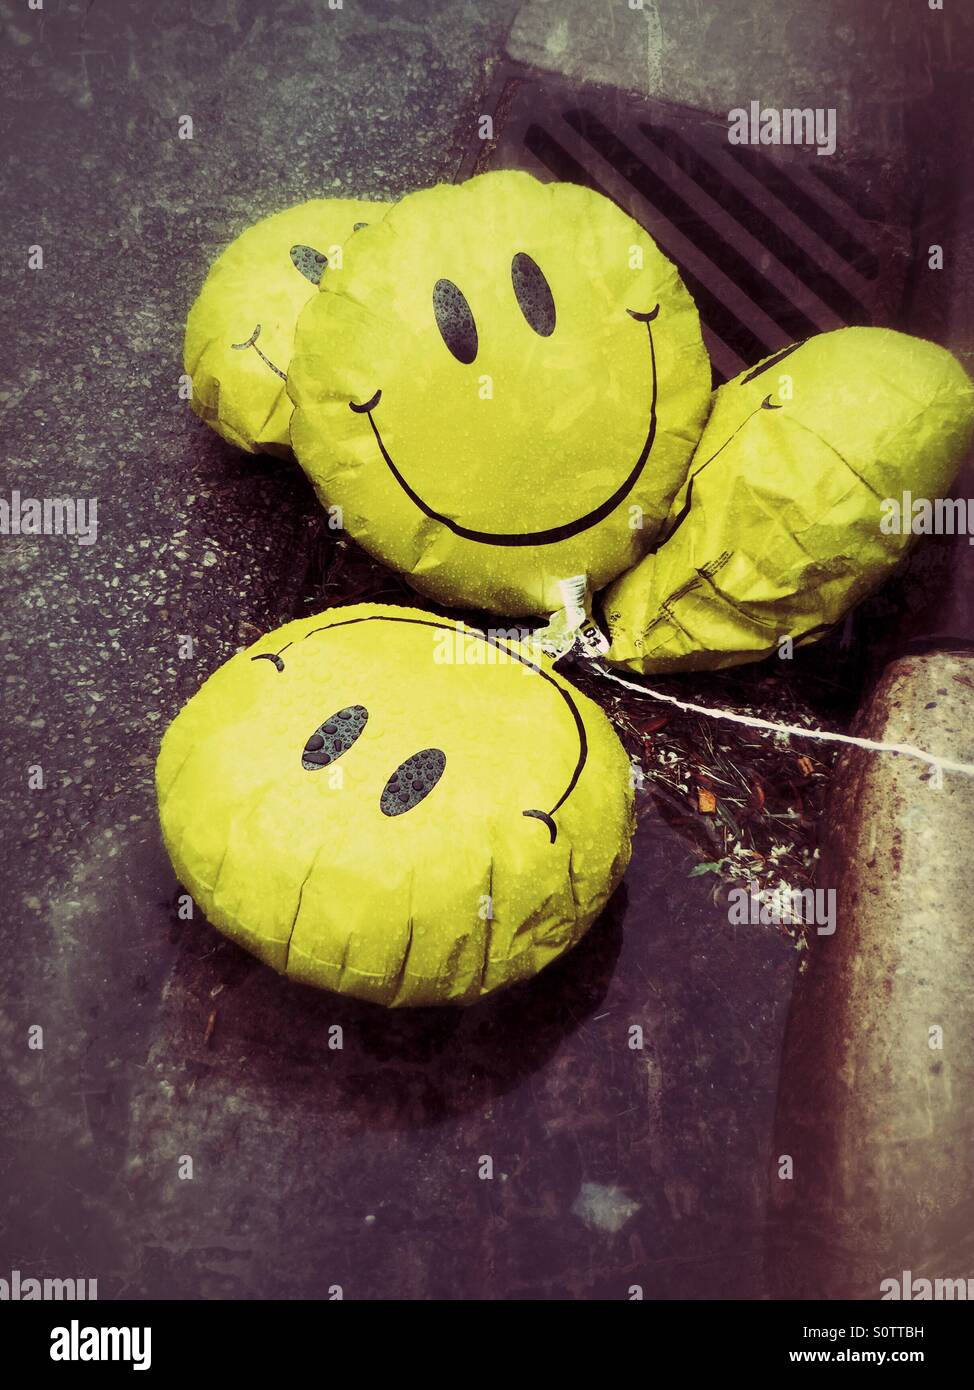 Sad, deflated happy face balloons laying in a puddle on the side of the street Stock Photo